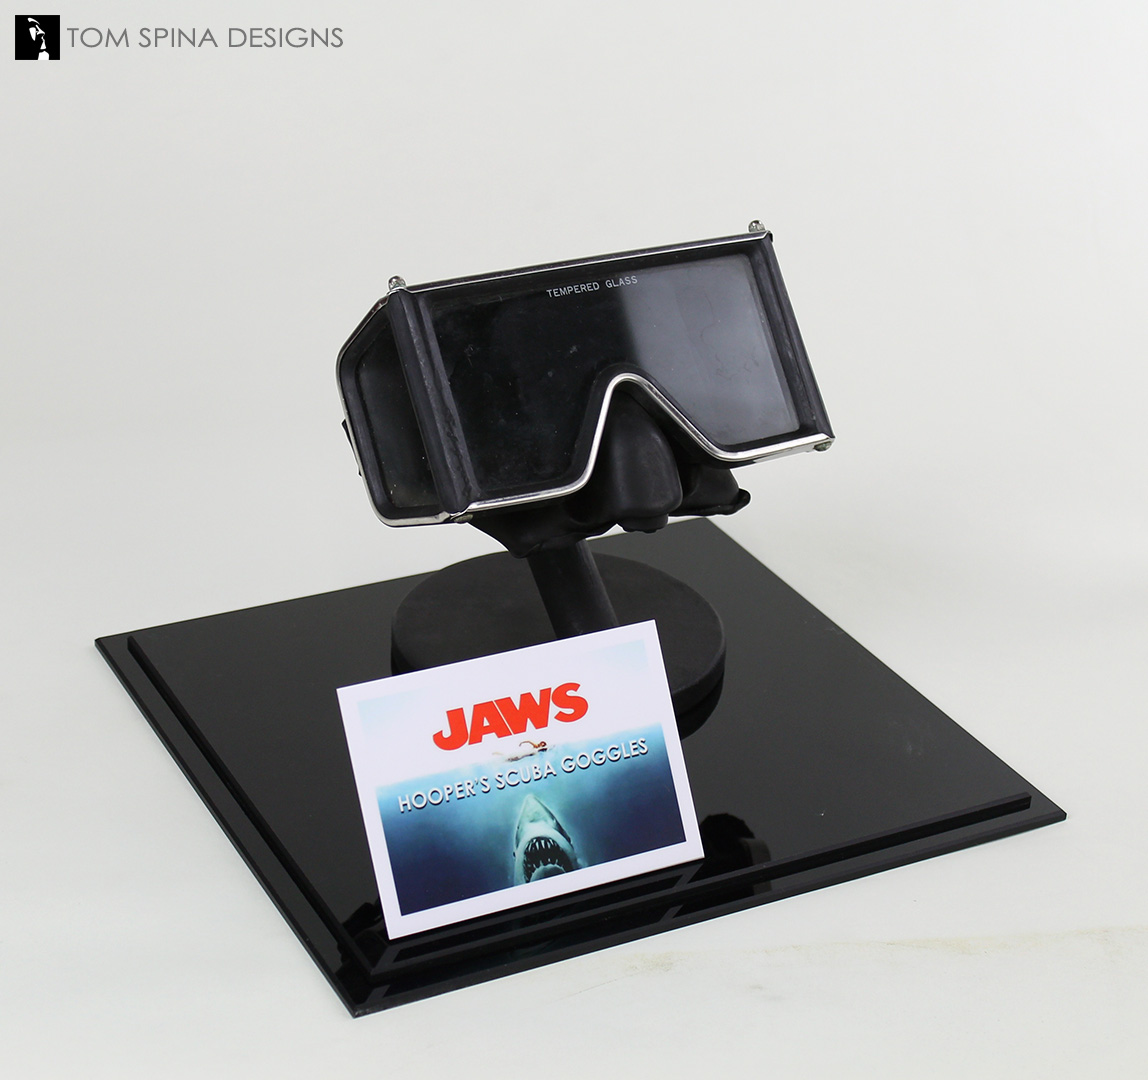 Acrylic Display Case for Screen Used Jaws Prop - Tom Spina Designs » Tom  Spina Designs